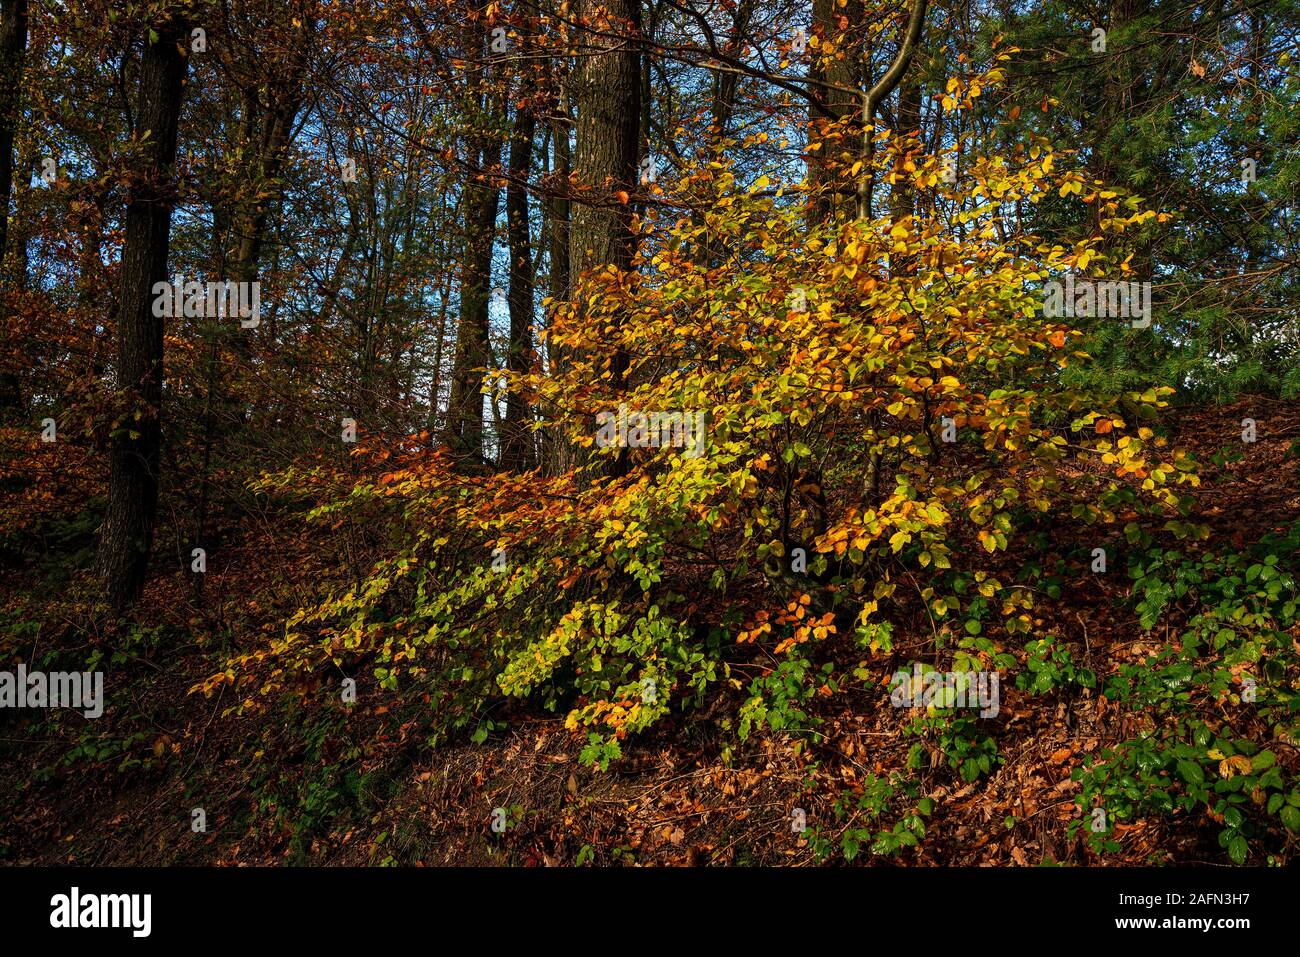 Foresta naturale in autunno, Eifel National Park. Foto Stock